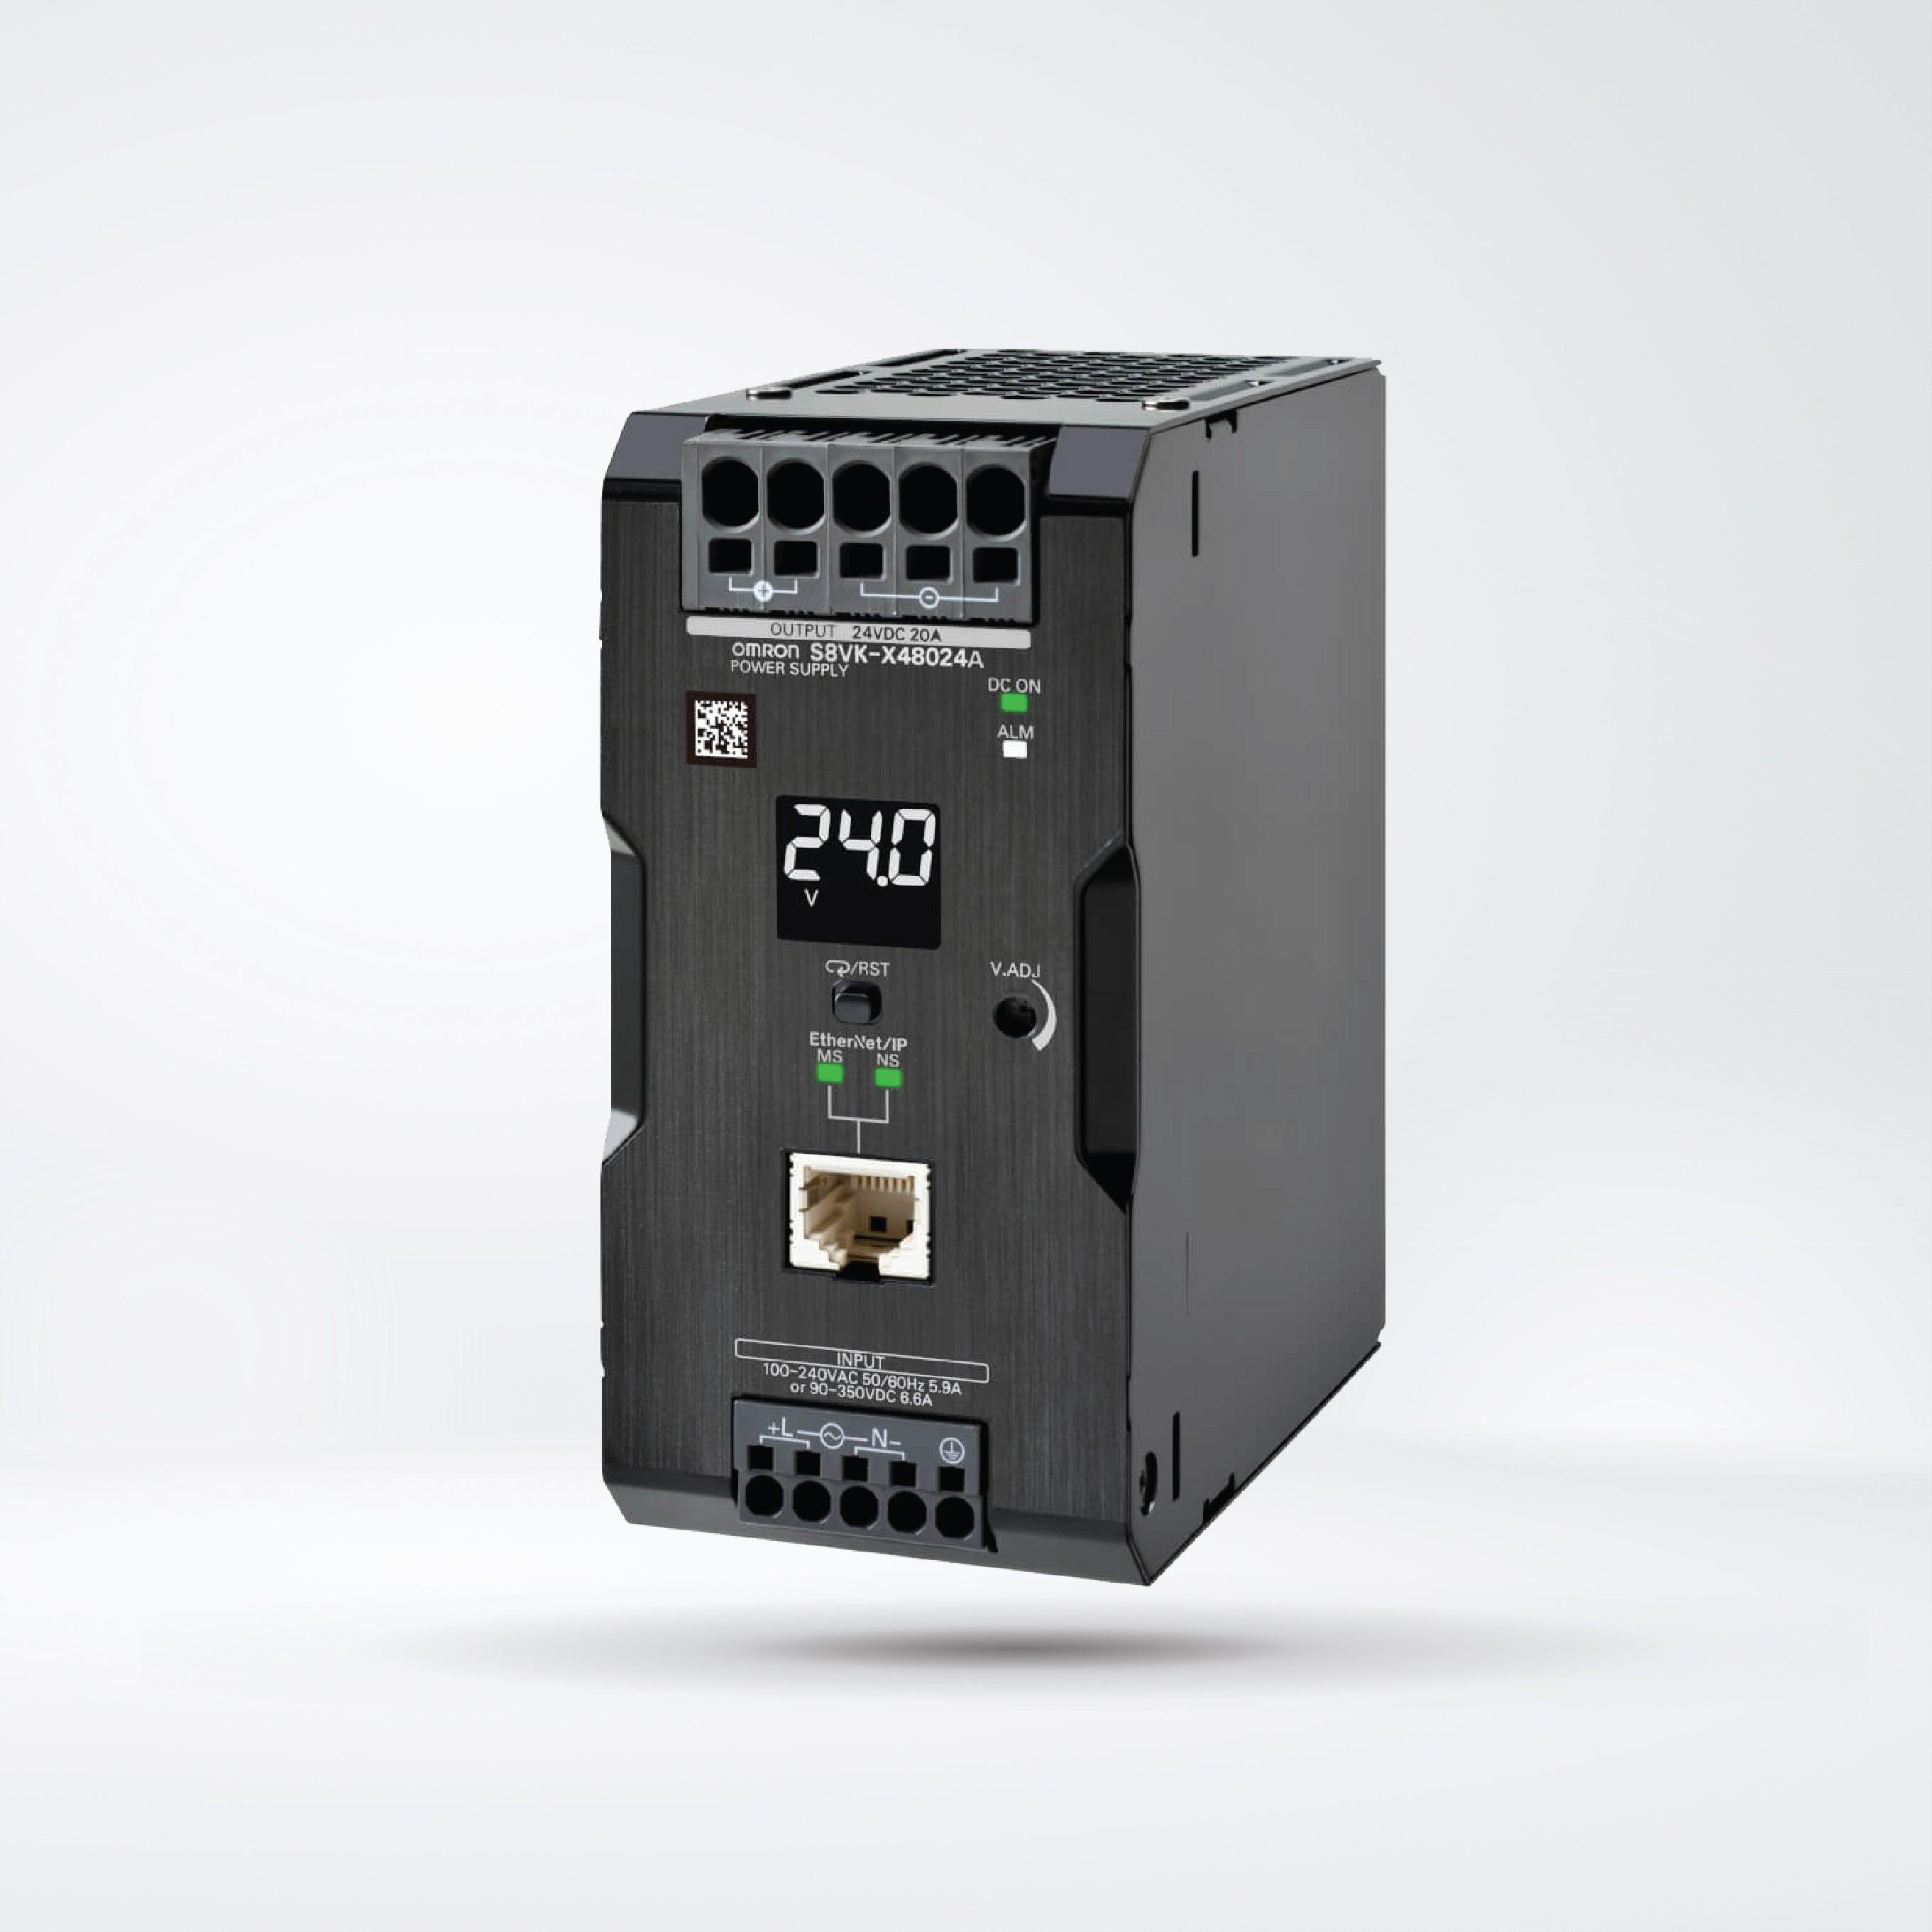 S8VK-X48024A-EIP Switch Mode Power Supply, with EtherNet/IP, Modbus TCP,480 W, 24 VDC, display - Riverplus